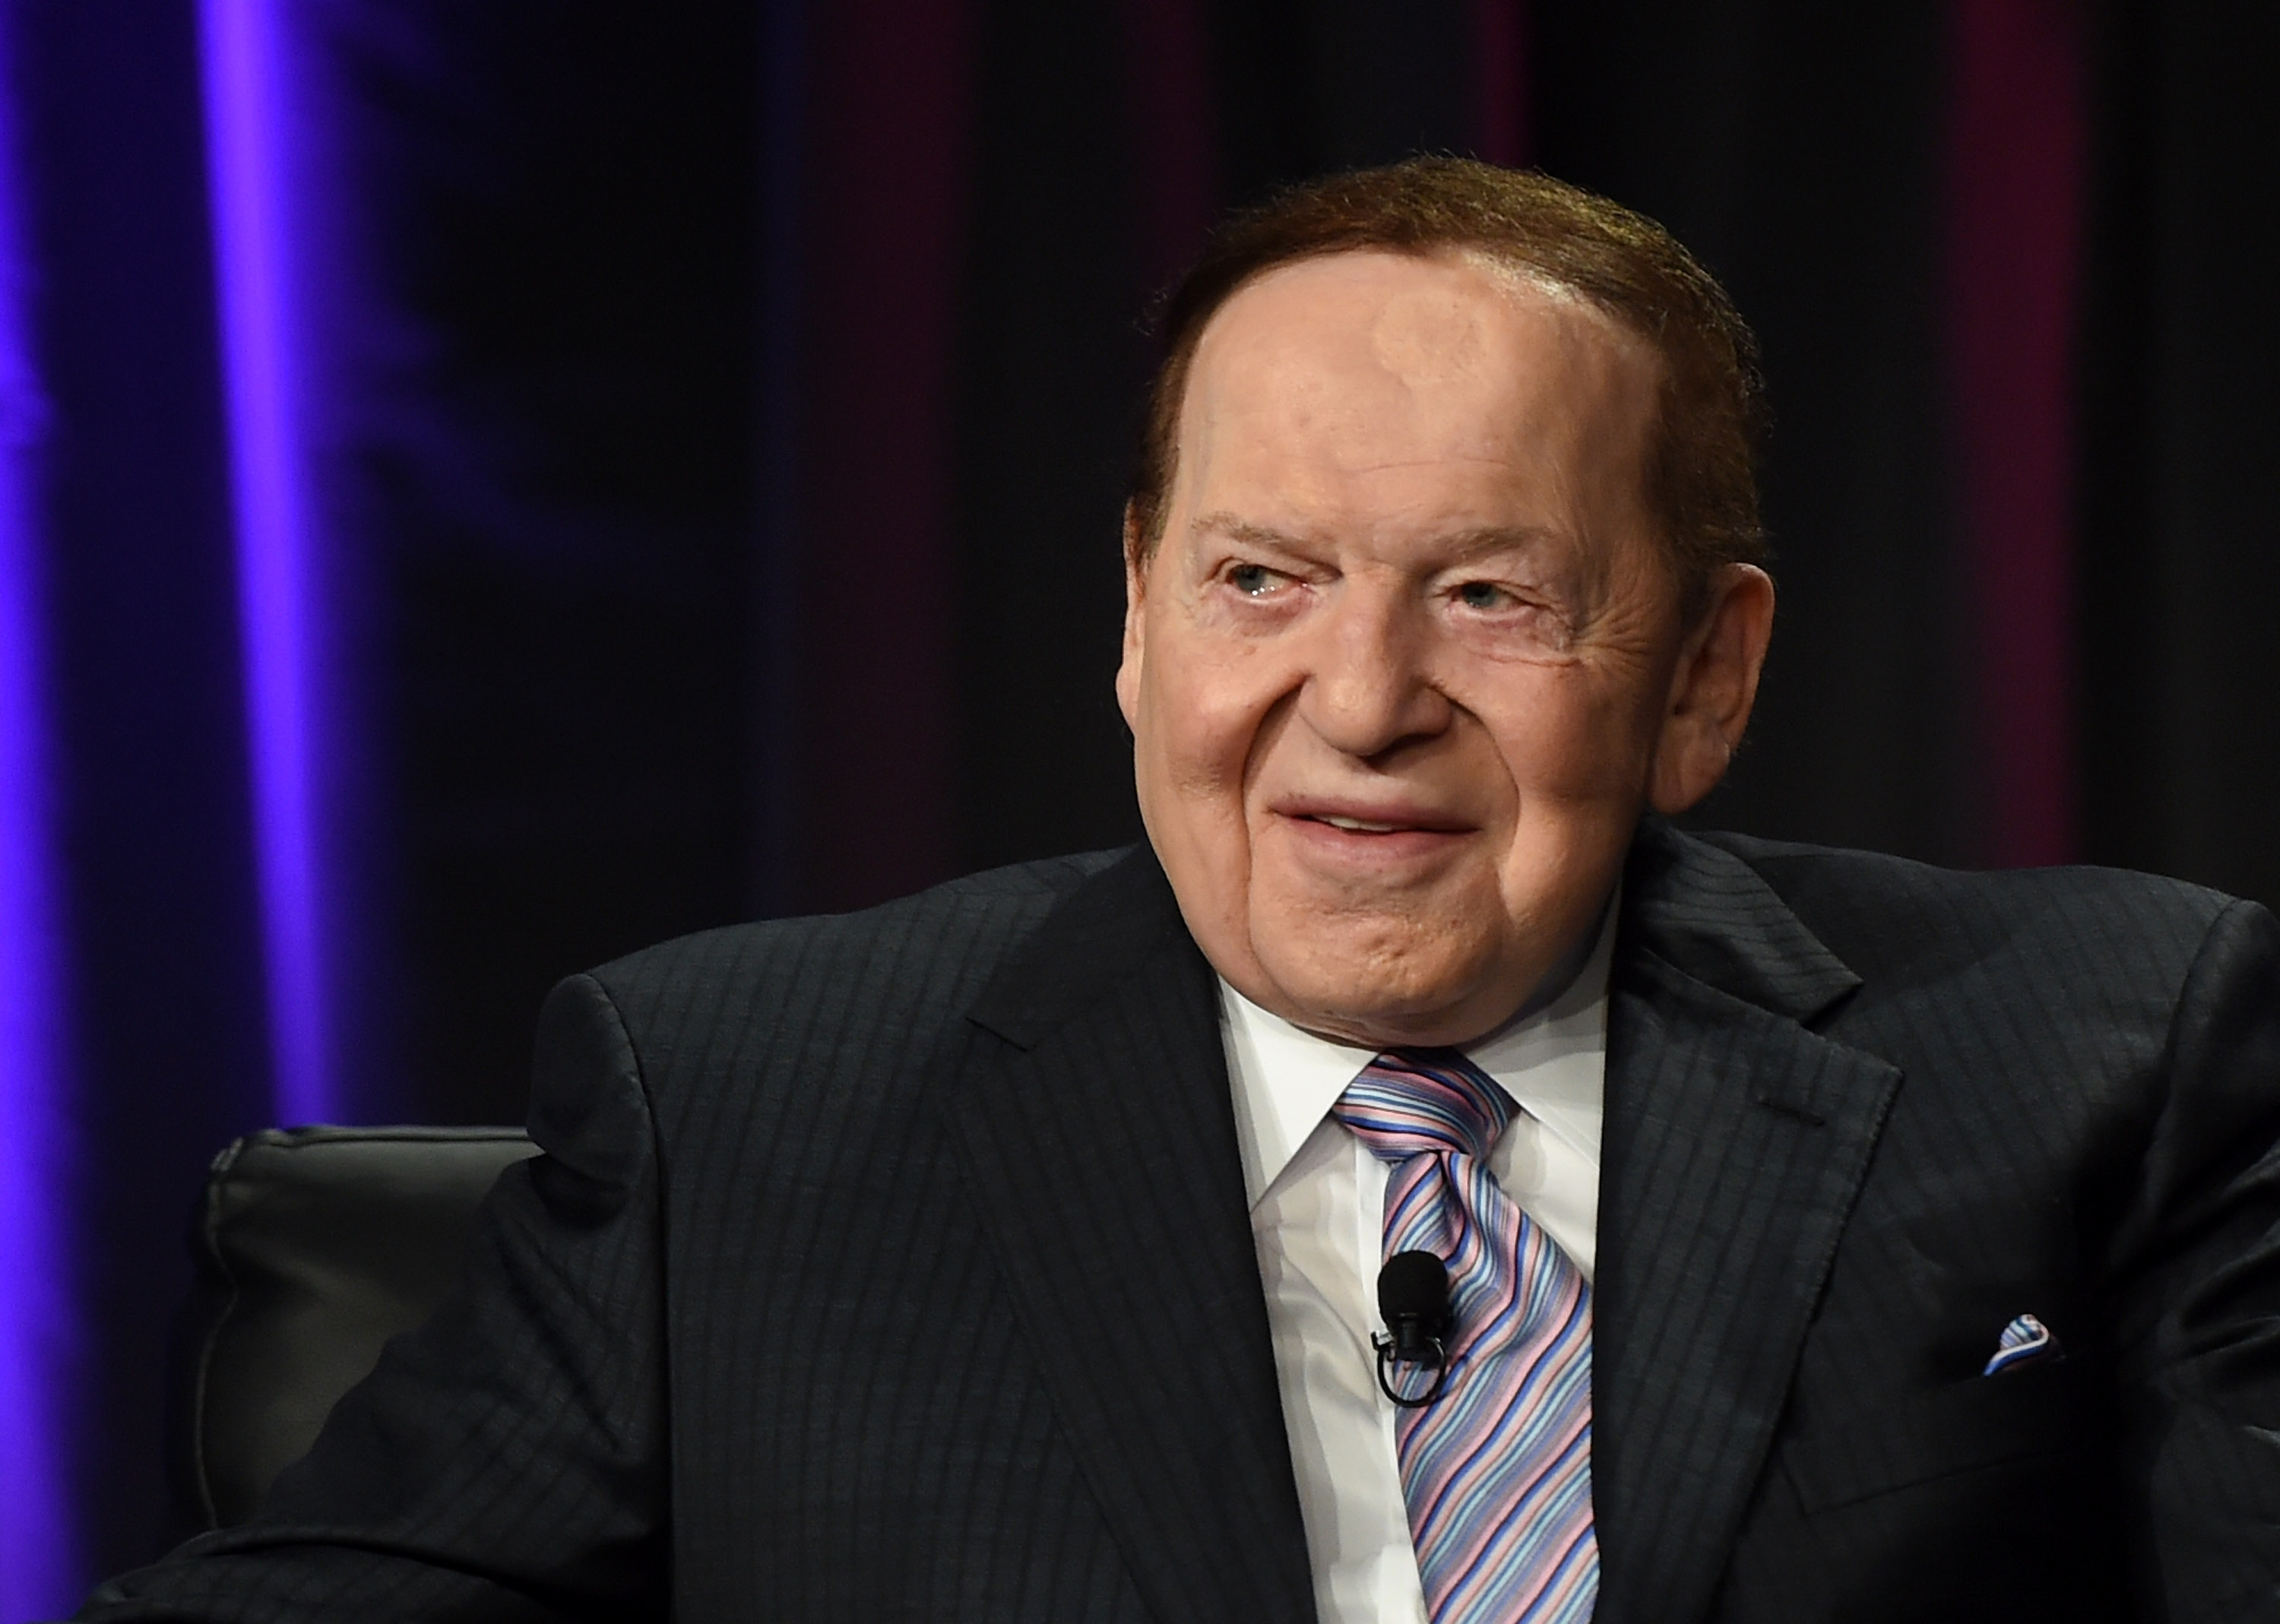 Las Vegas Sands Corp. Chairman and CEO Sheldon Adelson speaks at the Global Gaming Expo (G2E) 2014 at the Venetian Las Vegas in Las Vegas on Oct. 1, 2014